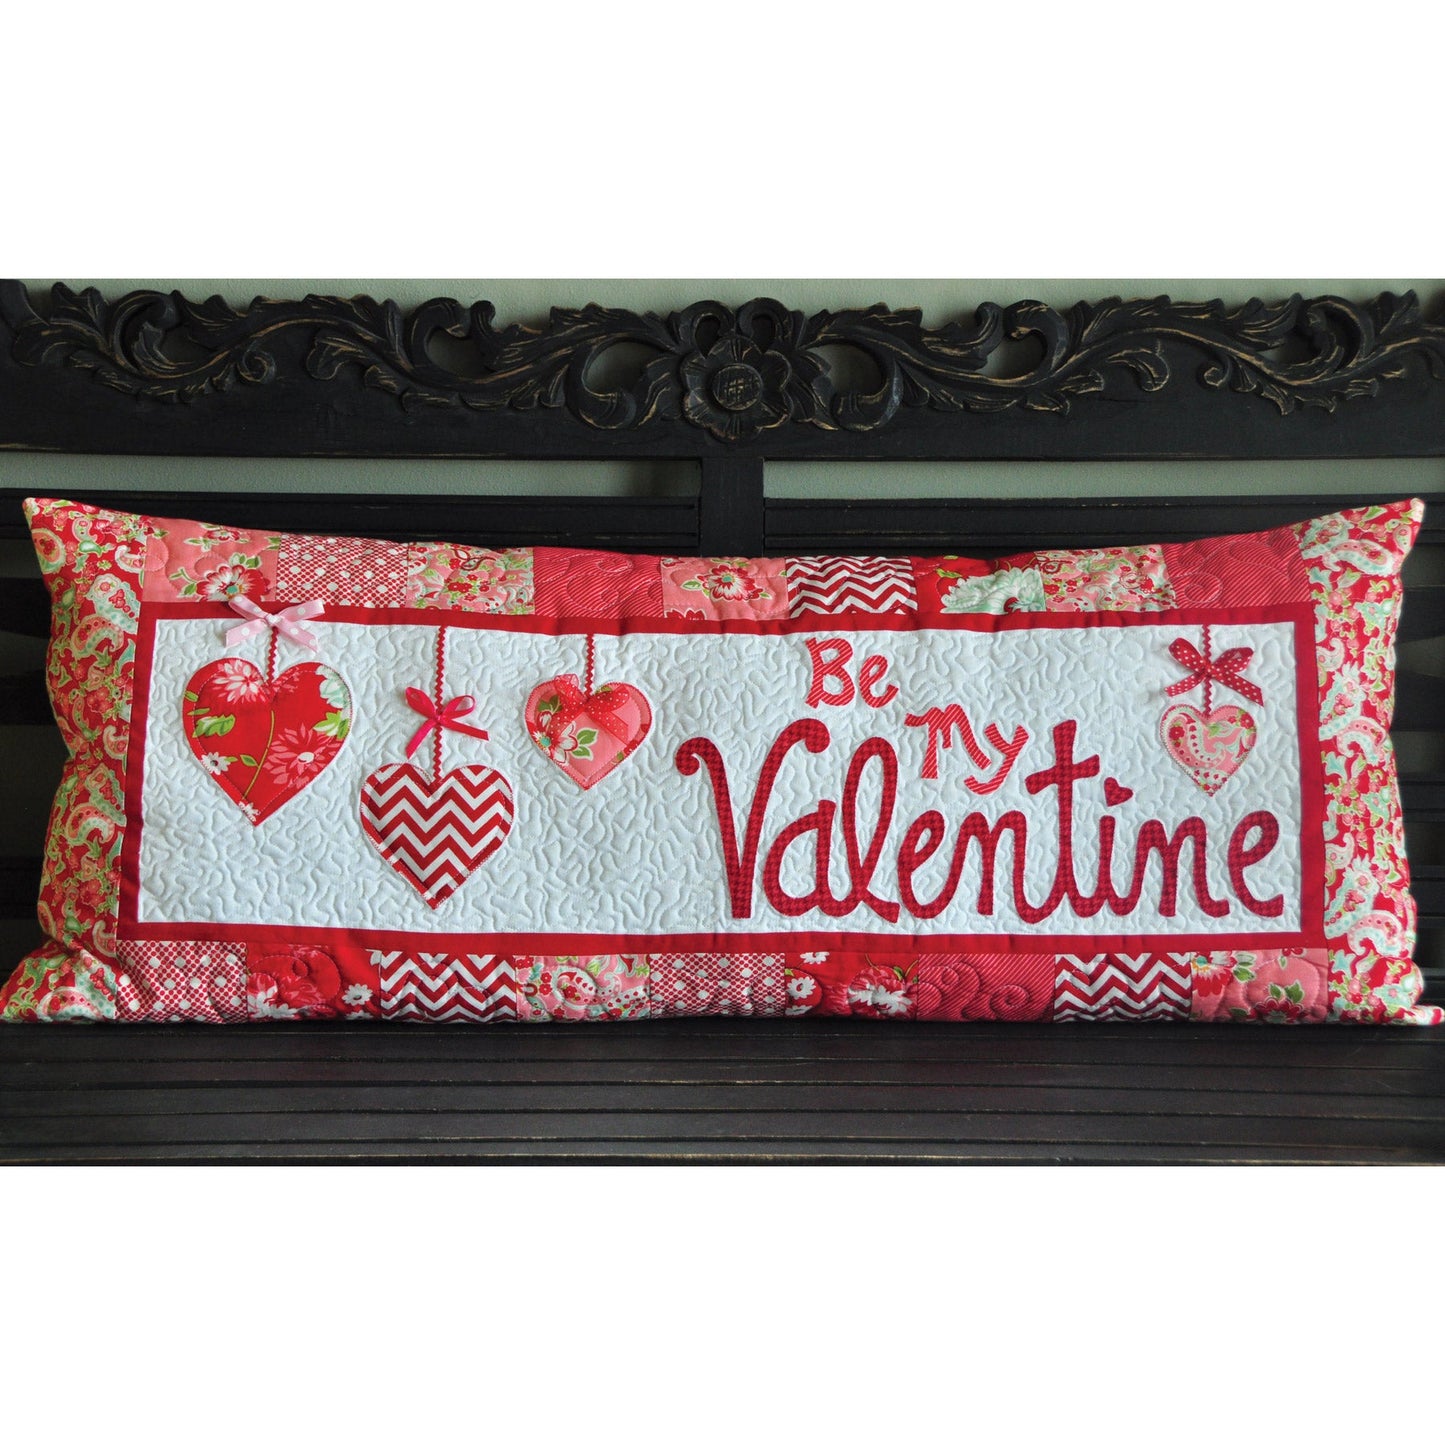 Dangling hearts, a sweet sentiment, and pieced border are somethings to love about the Be My Valentine Bench Pillow Sewing Version (KD166) by Kimberbell. It is the perfect way to bring in the season and announce your love to someone special. Photo shows the finished pillow cover.